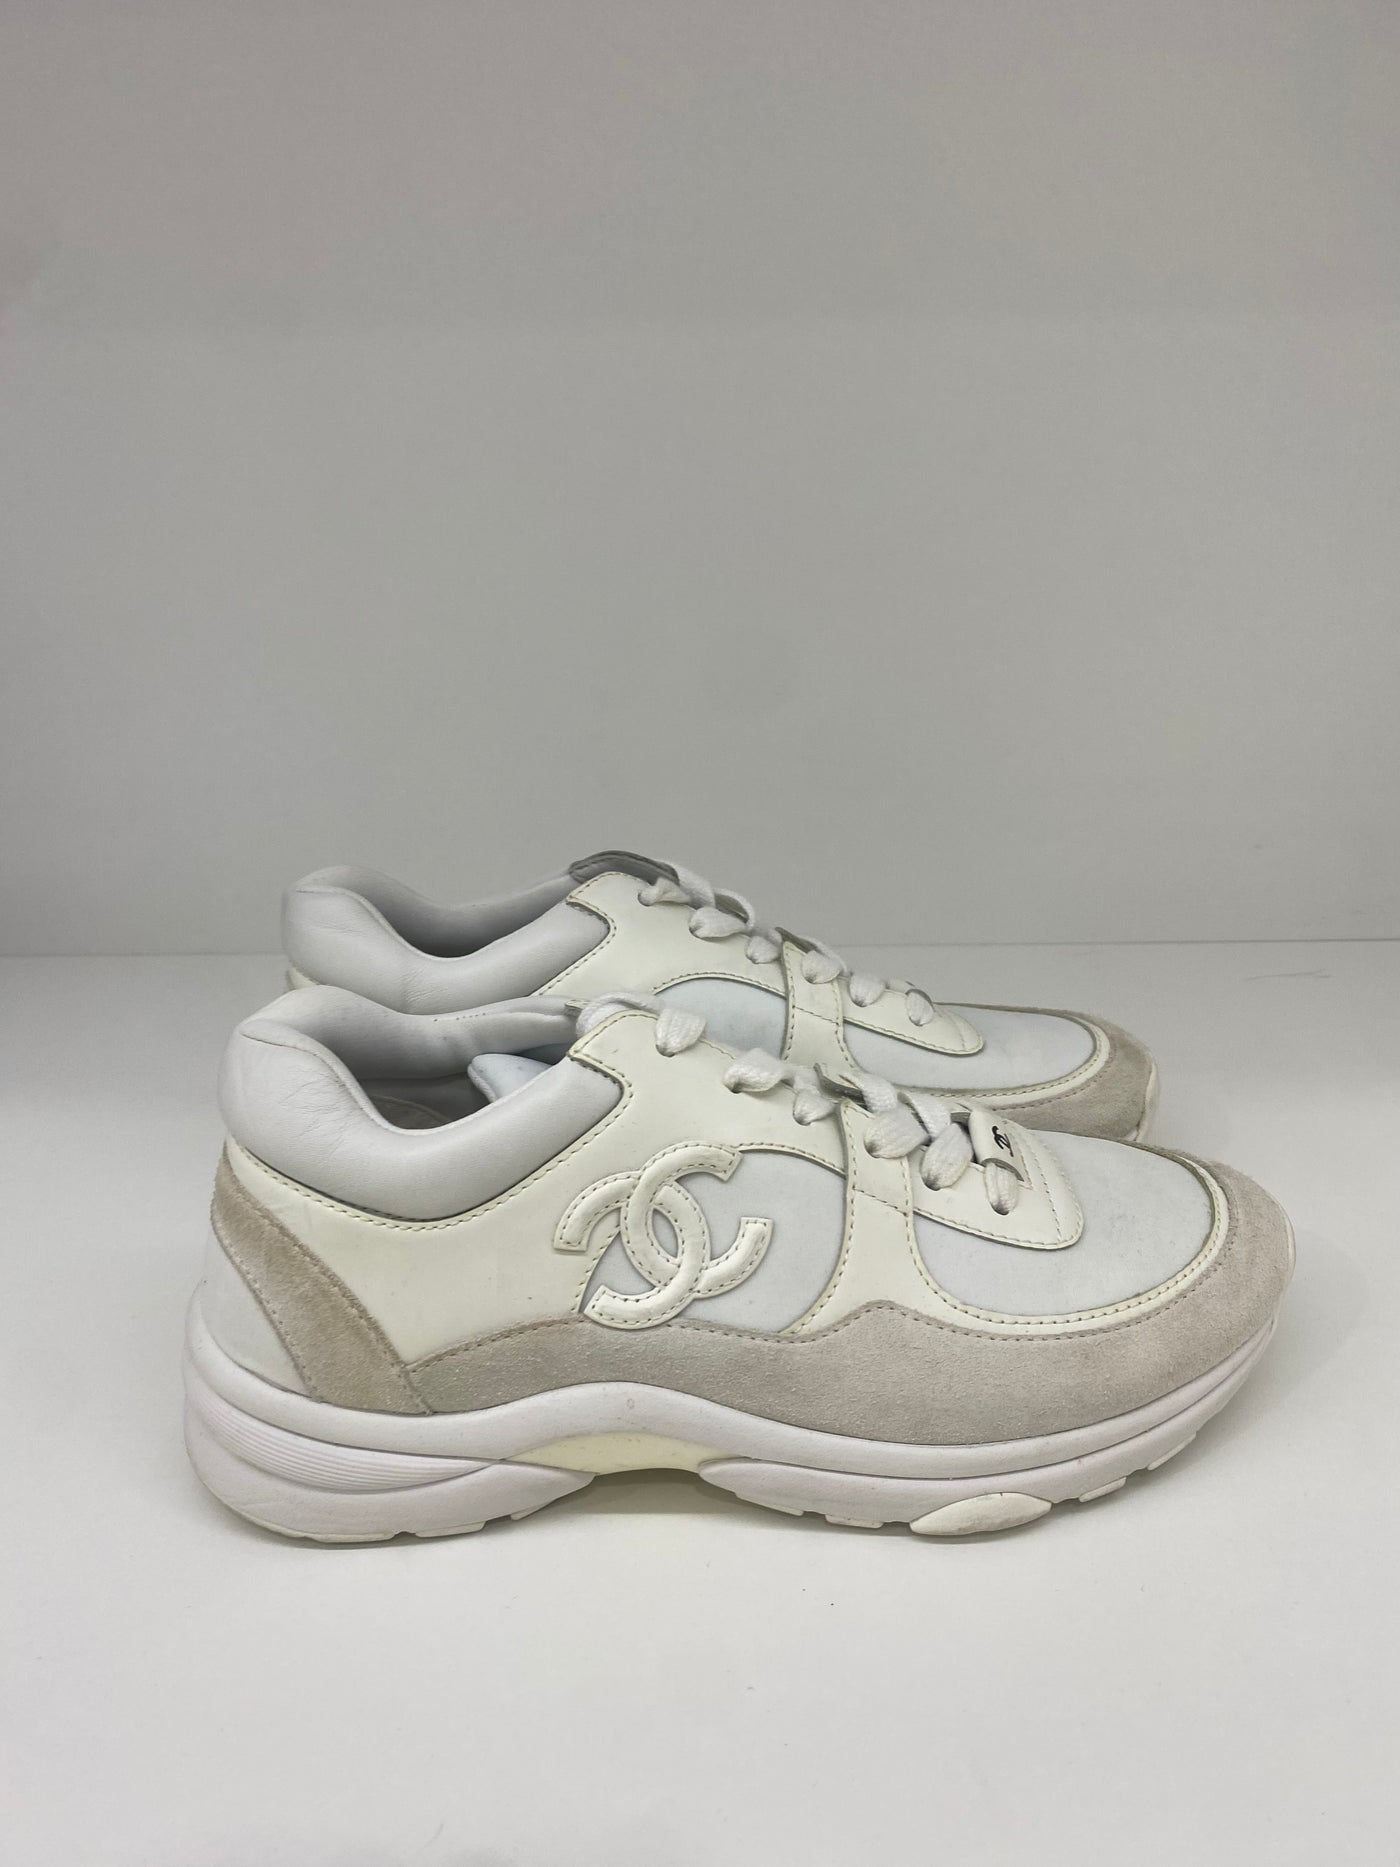 Chanel White Sneakers Size 36